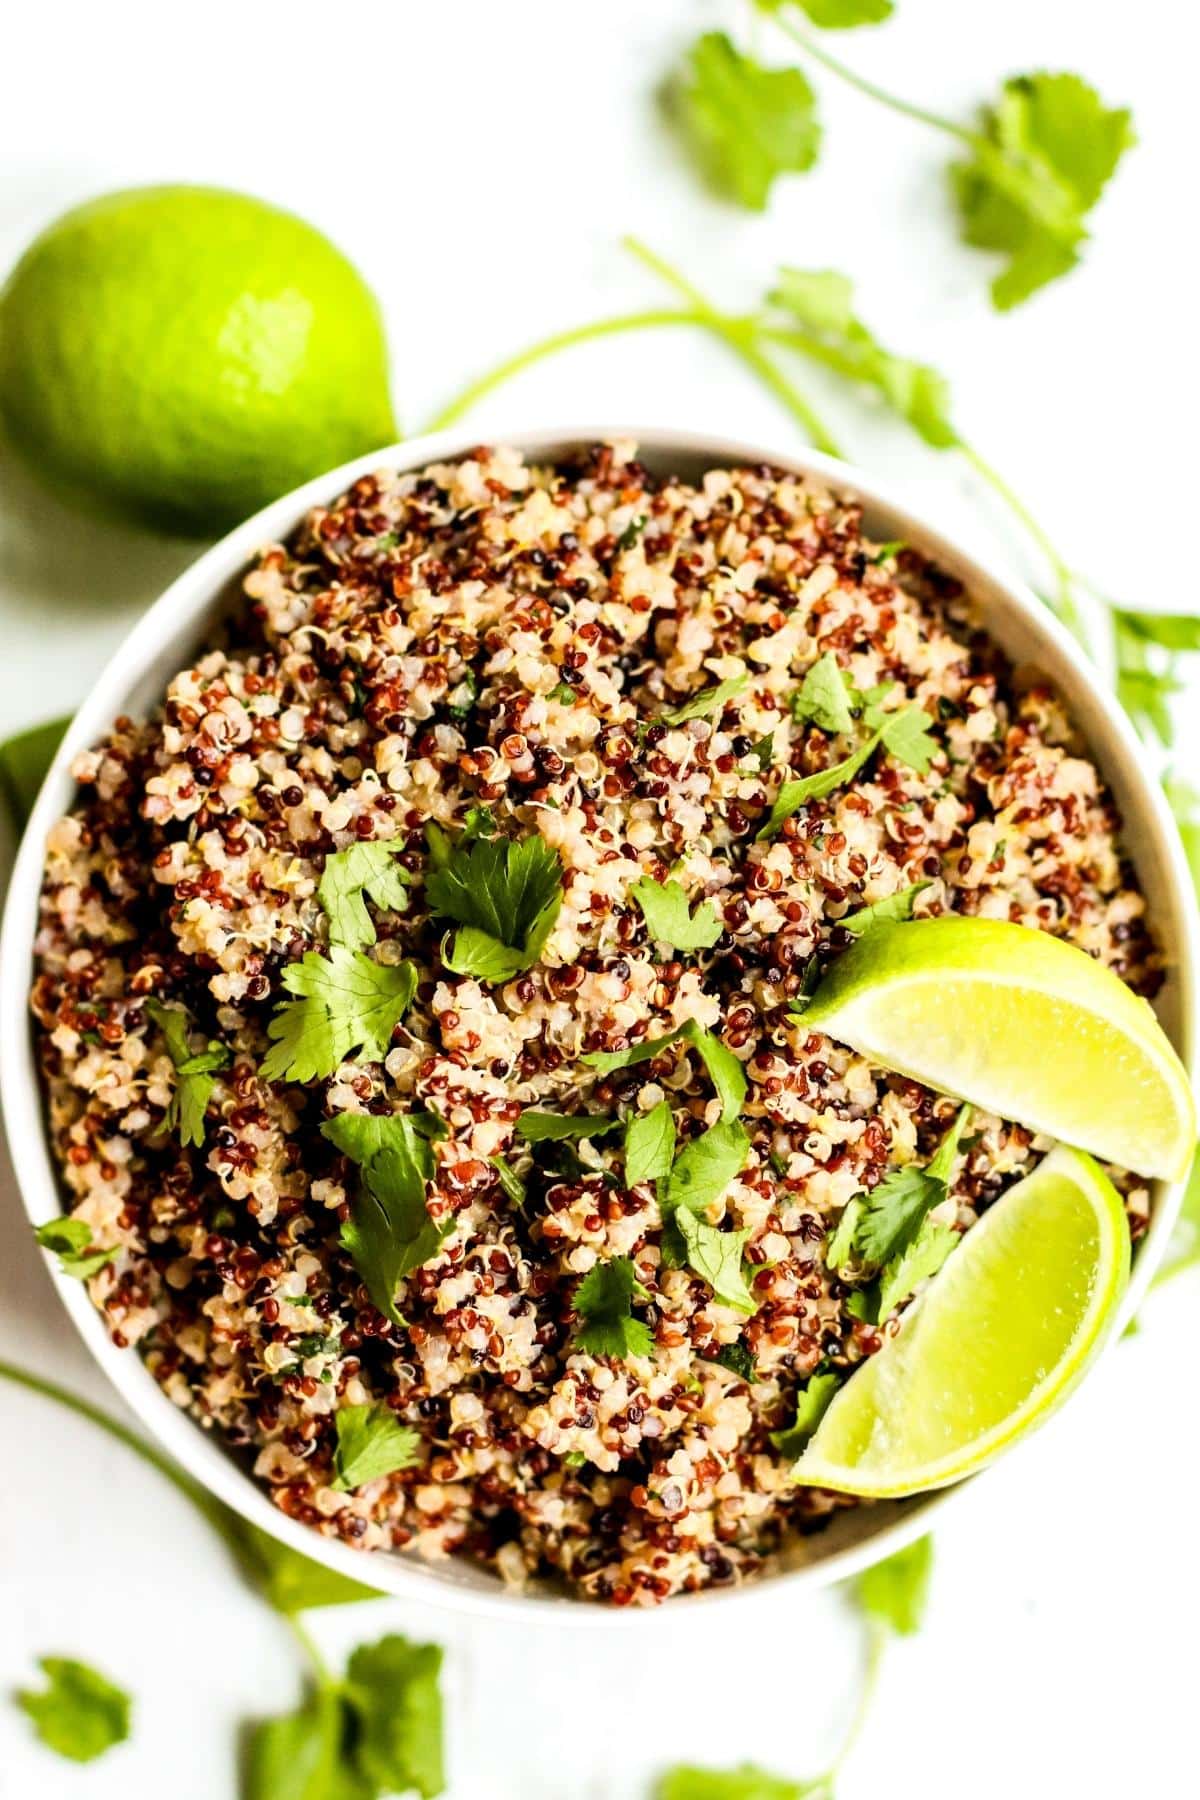 The finished cooked quinoa in a bowl with a lime and stems of fresh cilantro next to it.